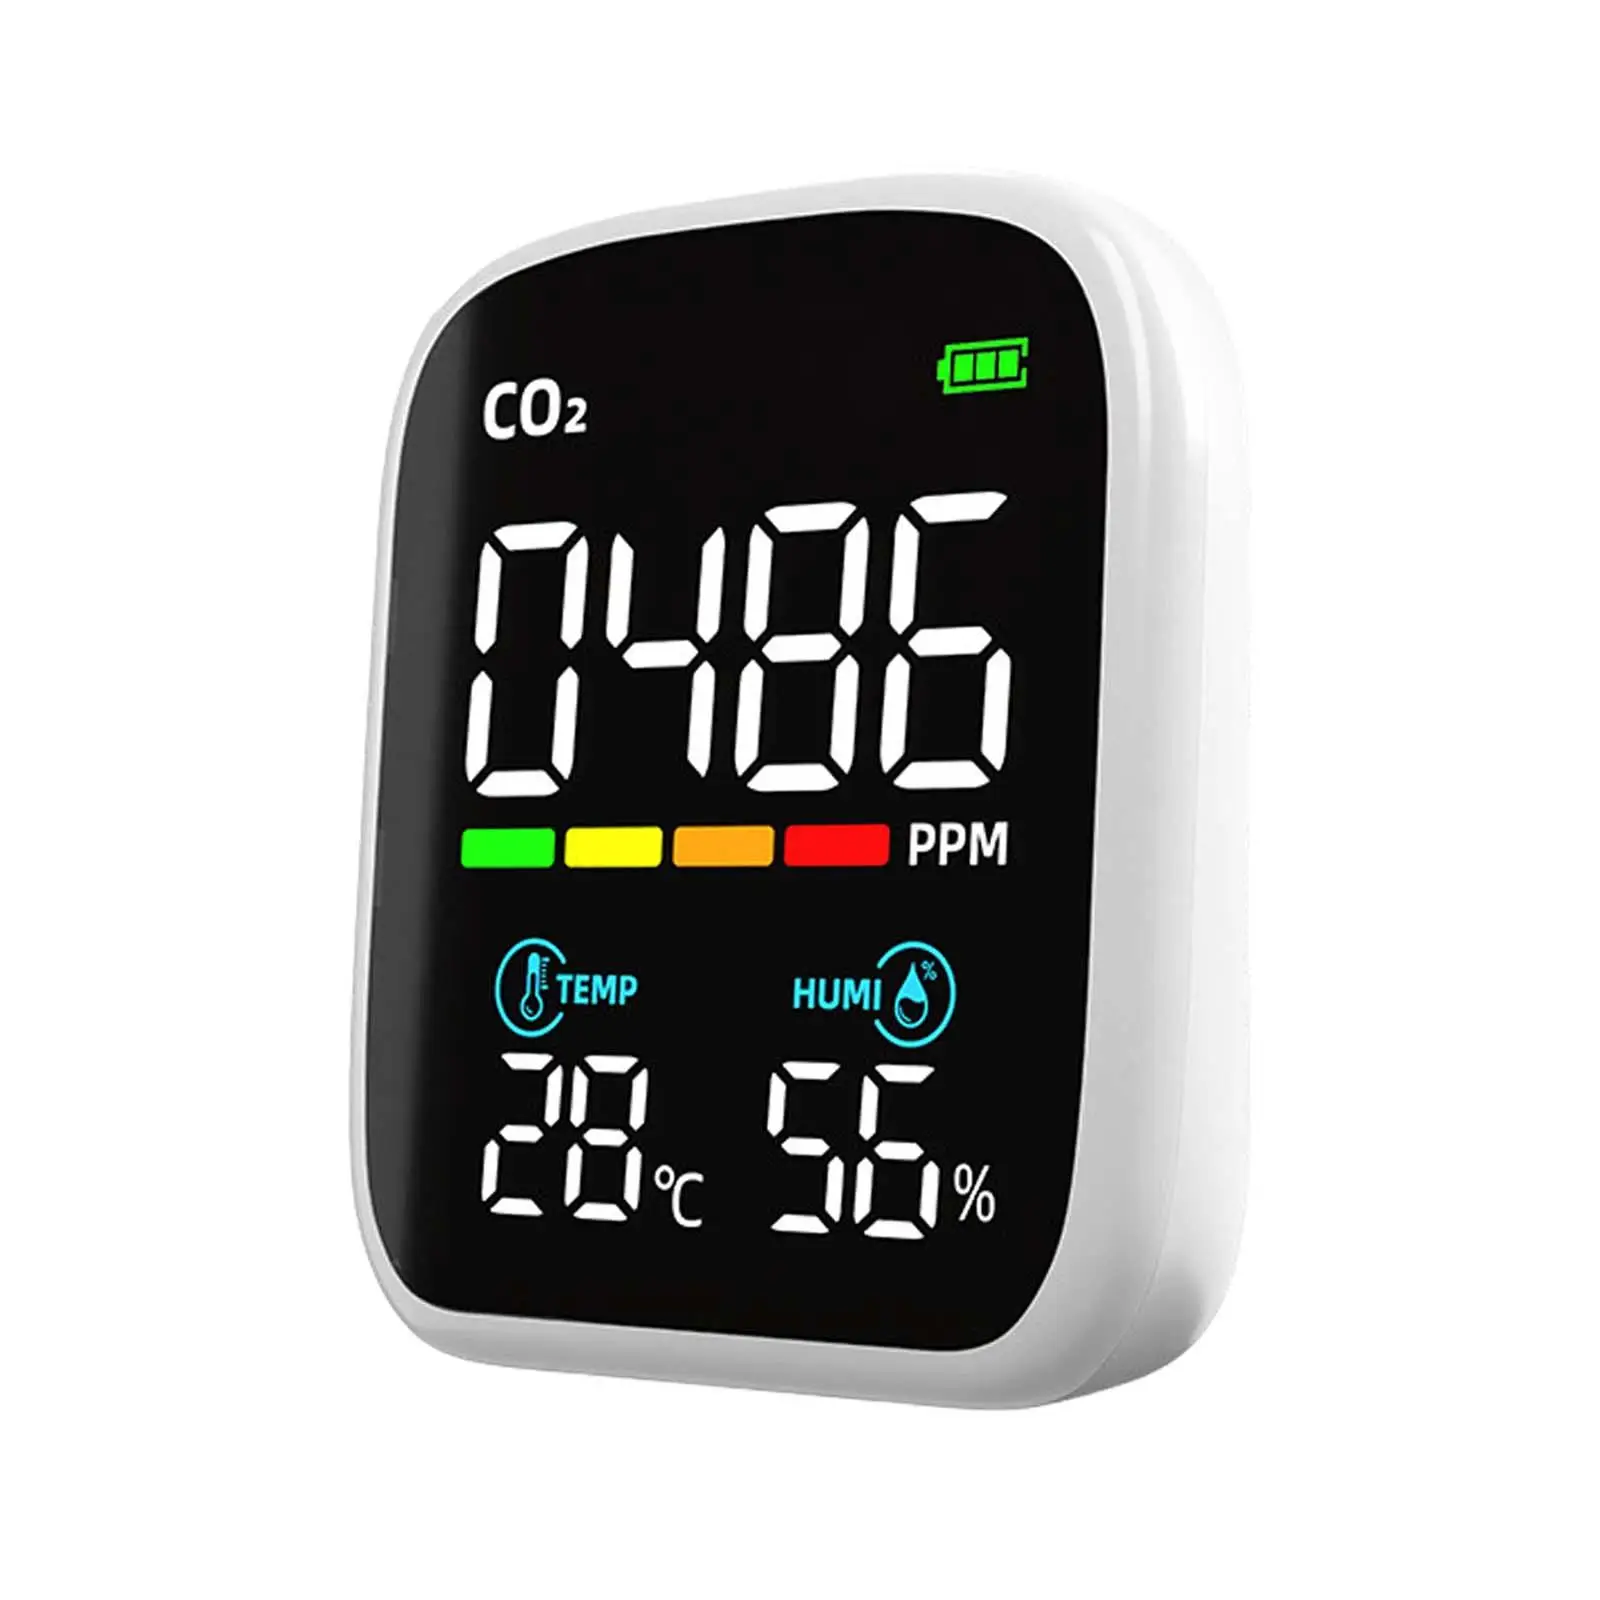 CO2 Digital Monitor Tester Meter Monitor Large Screen Air Quality Analyzer Monitor for Travel Hotel